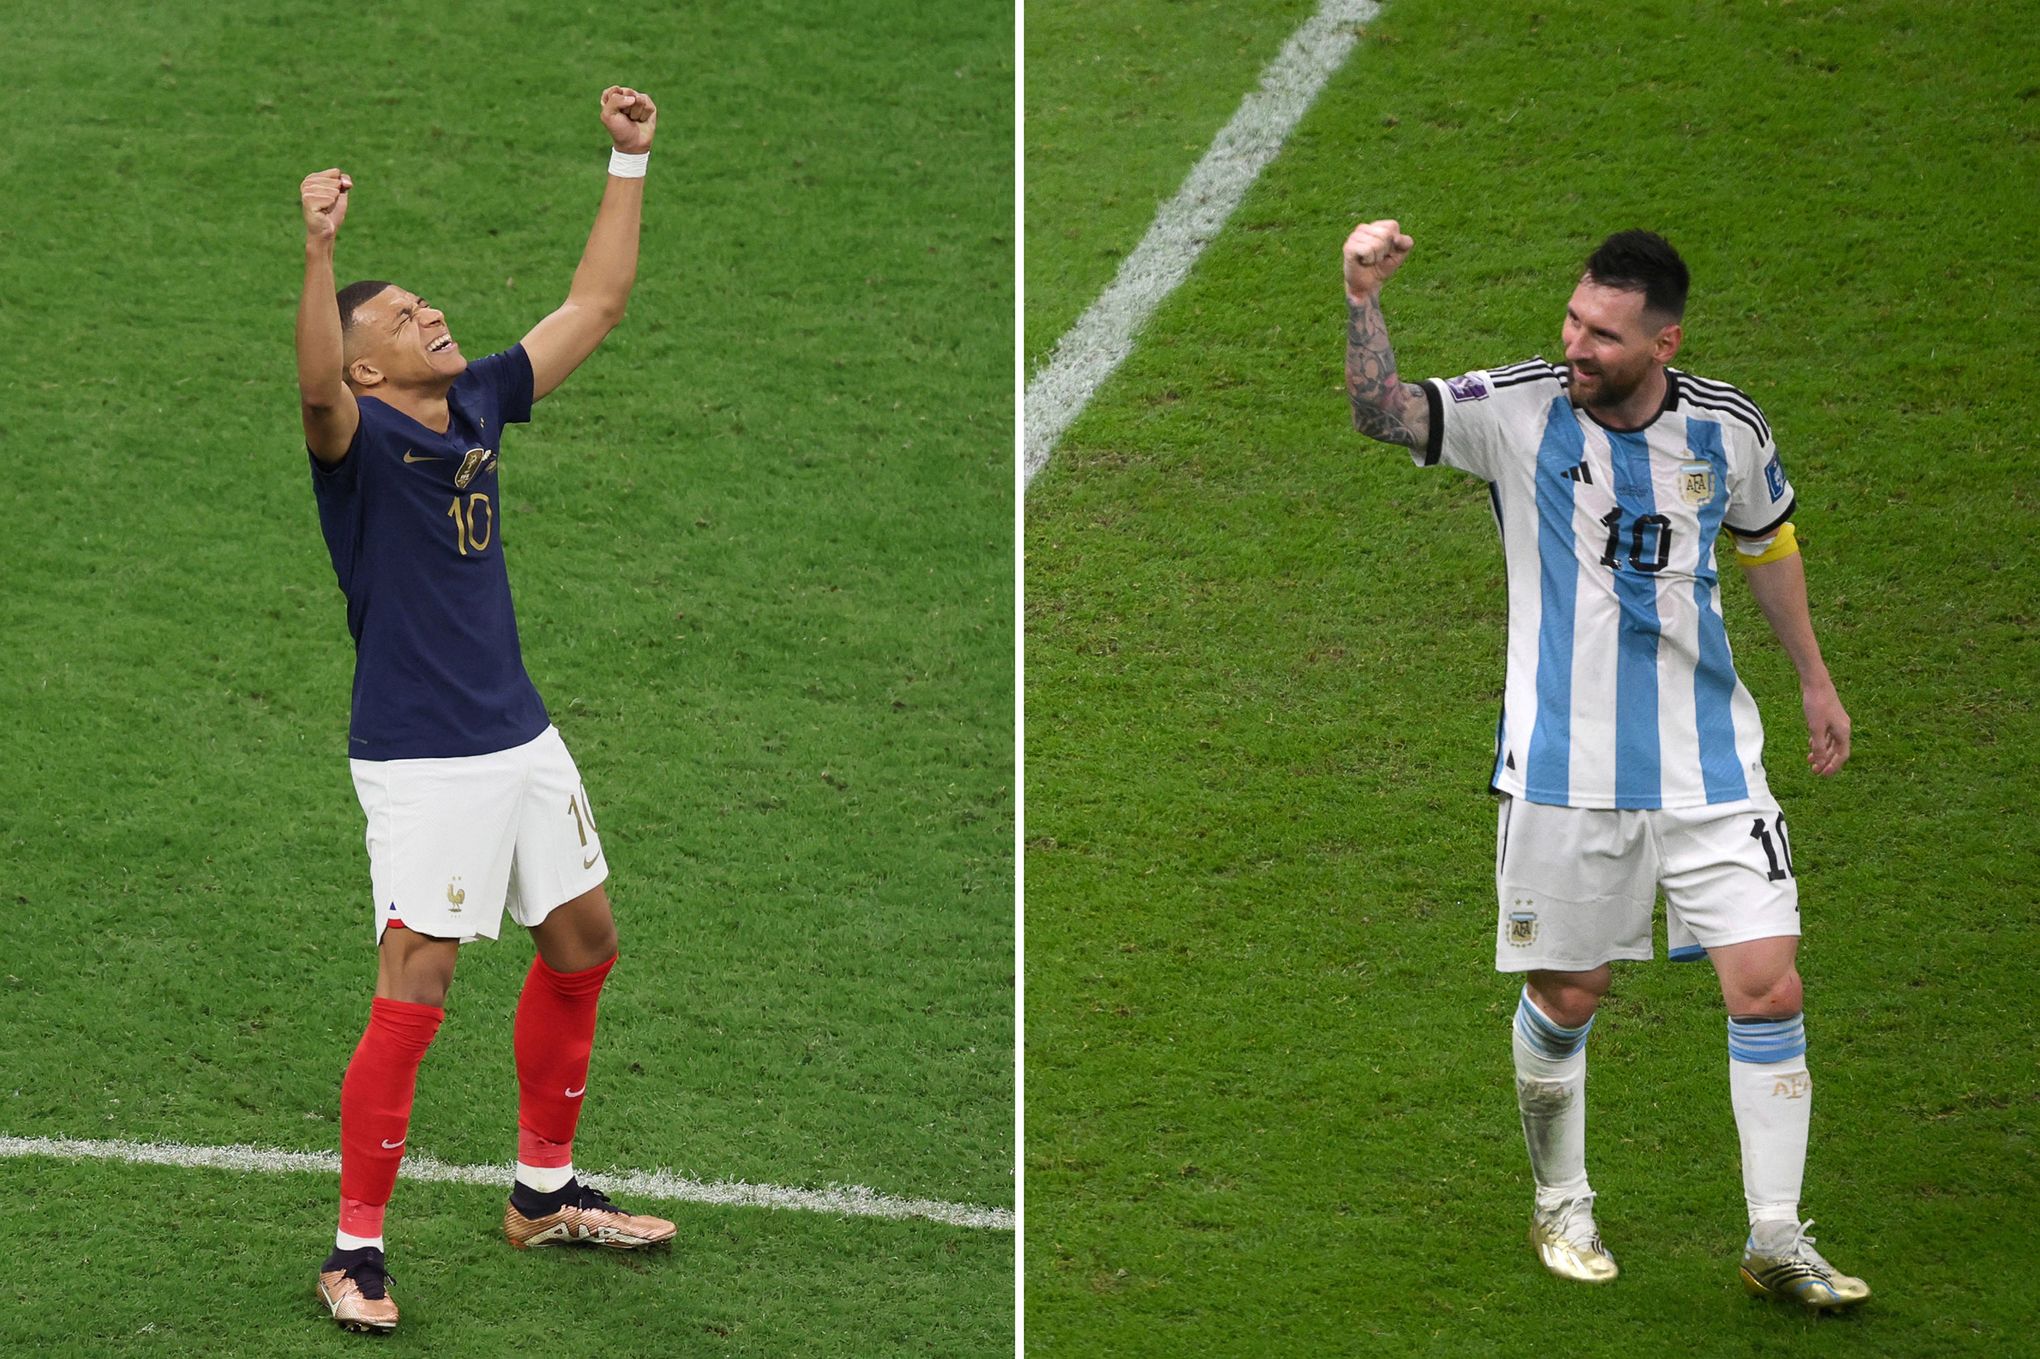 Argentina vs France FIFA World Cup highlights: Messi gets his